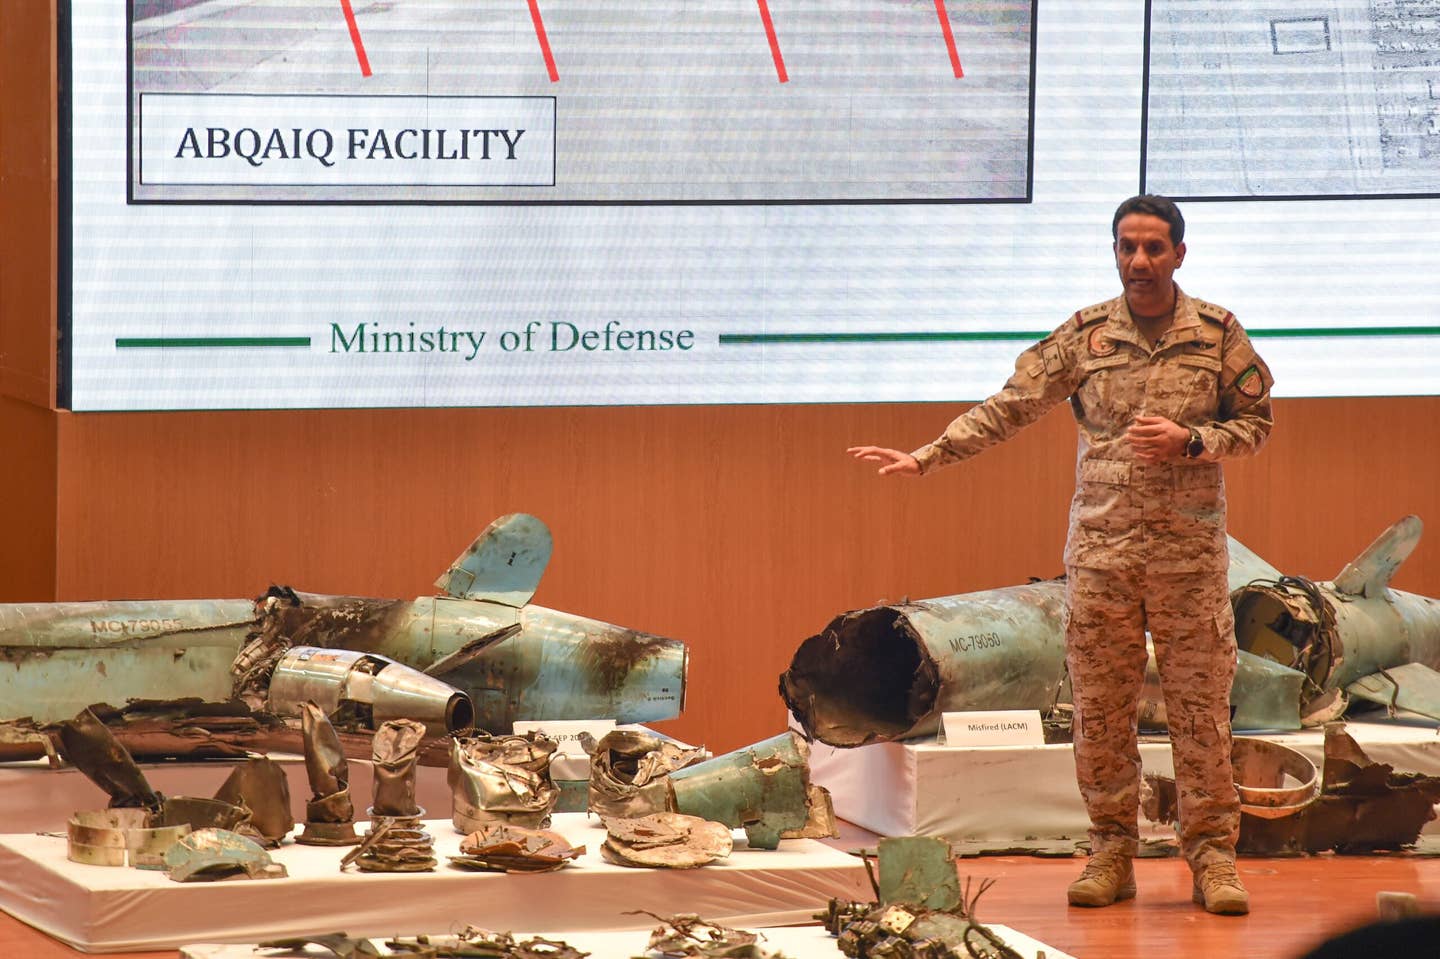 A Saudi defense ministry spokesman displays pieces of what he said were Iranian cruise missiles and drones recovered from the attack site that targeted the Saudi Aramco facilities, during a press conference in Riyadh in September 2019. <em>Photo by FAYEZ NURELDINE/AFP via Getty Images</em>